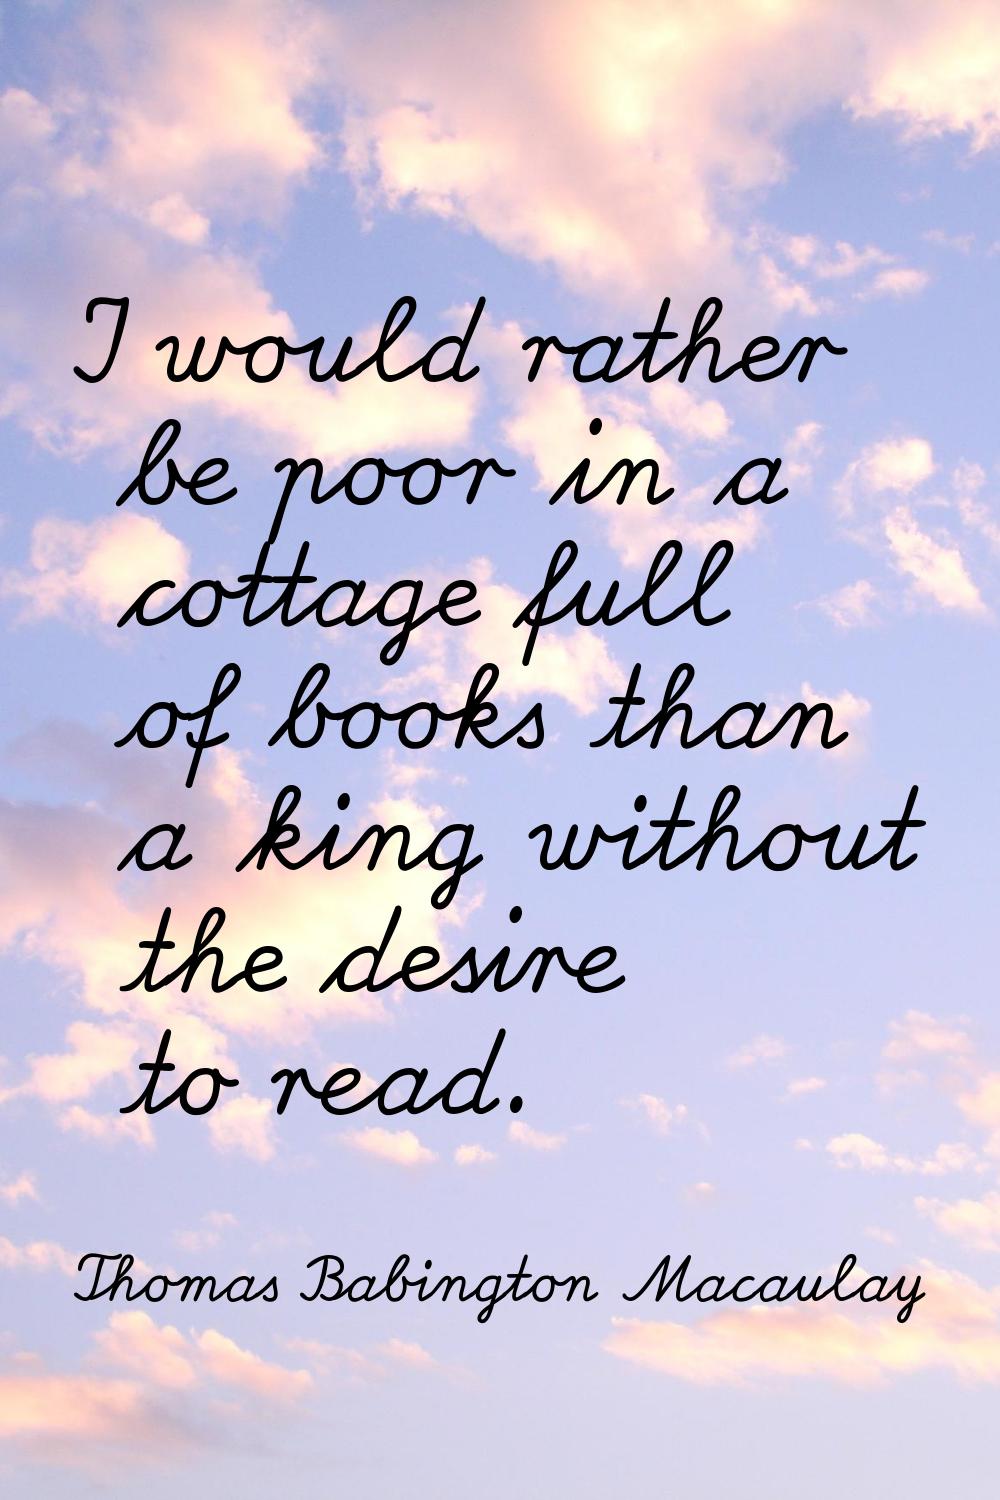 I would rather be poor in a cottage full of books than a king without the desire to read.